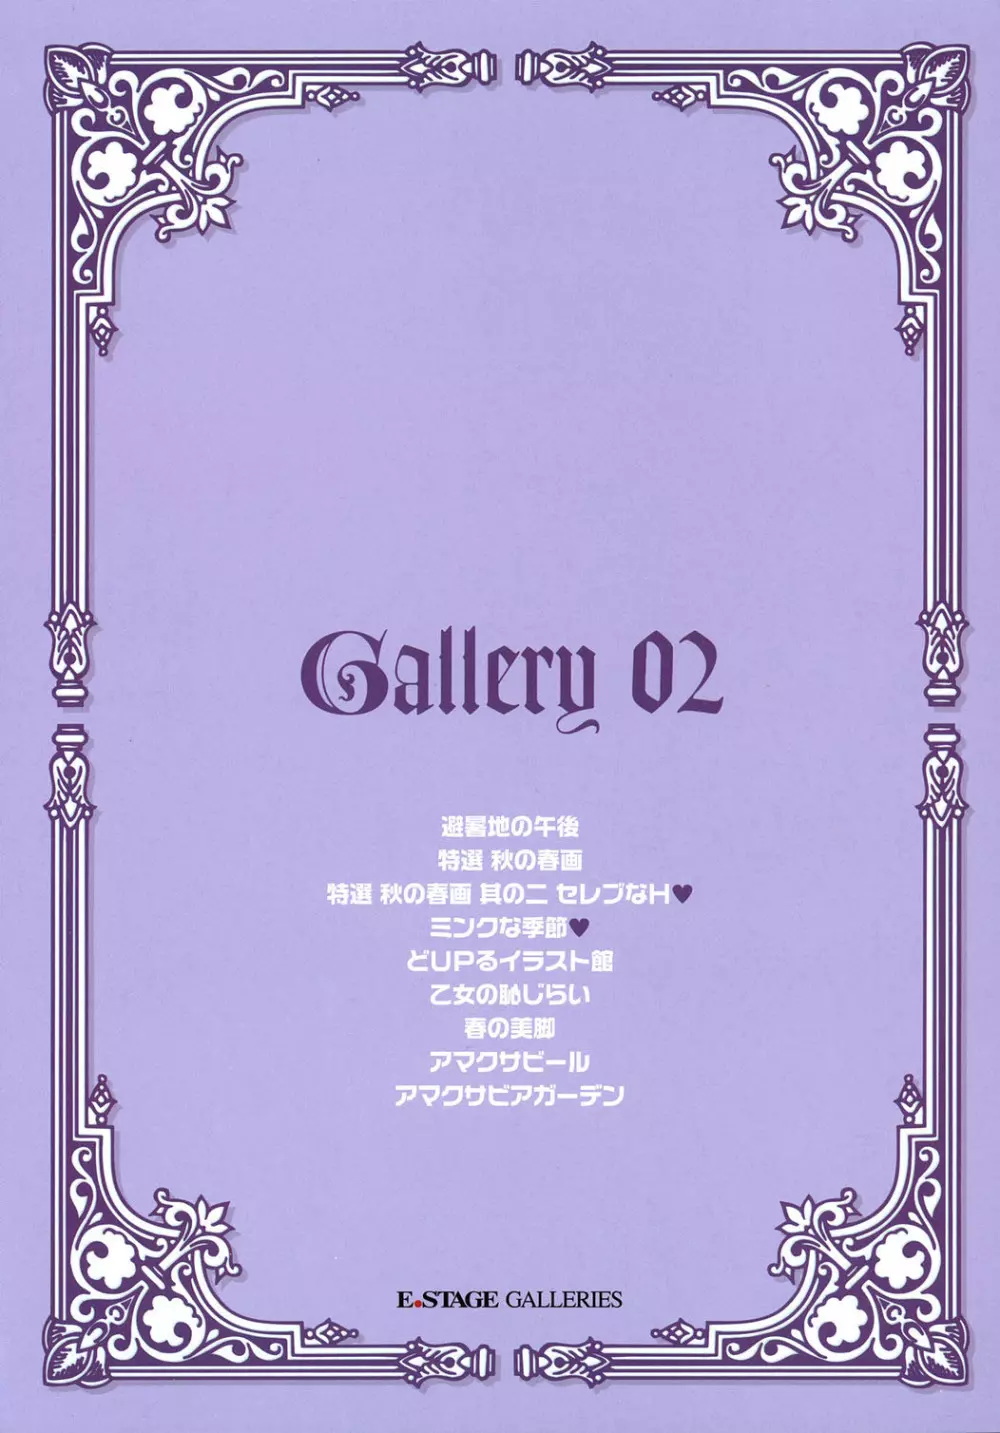 E.STAGE GALLERIES 38ページ